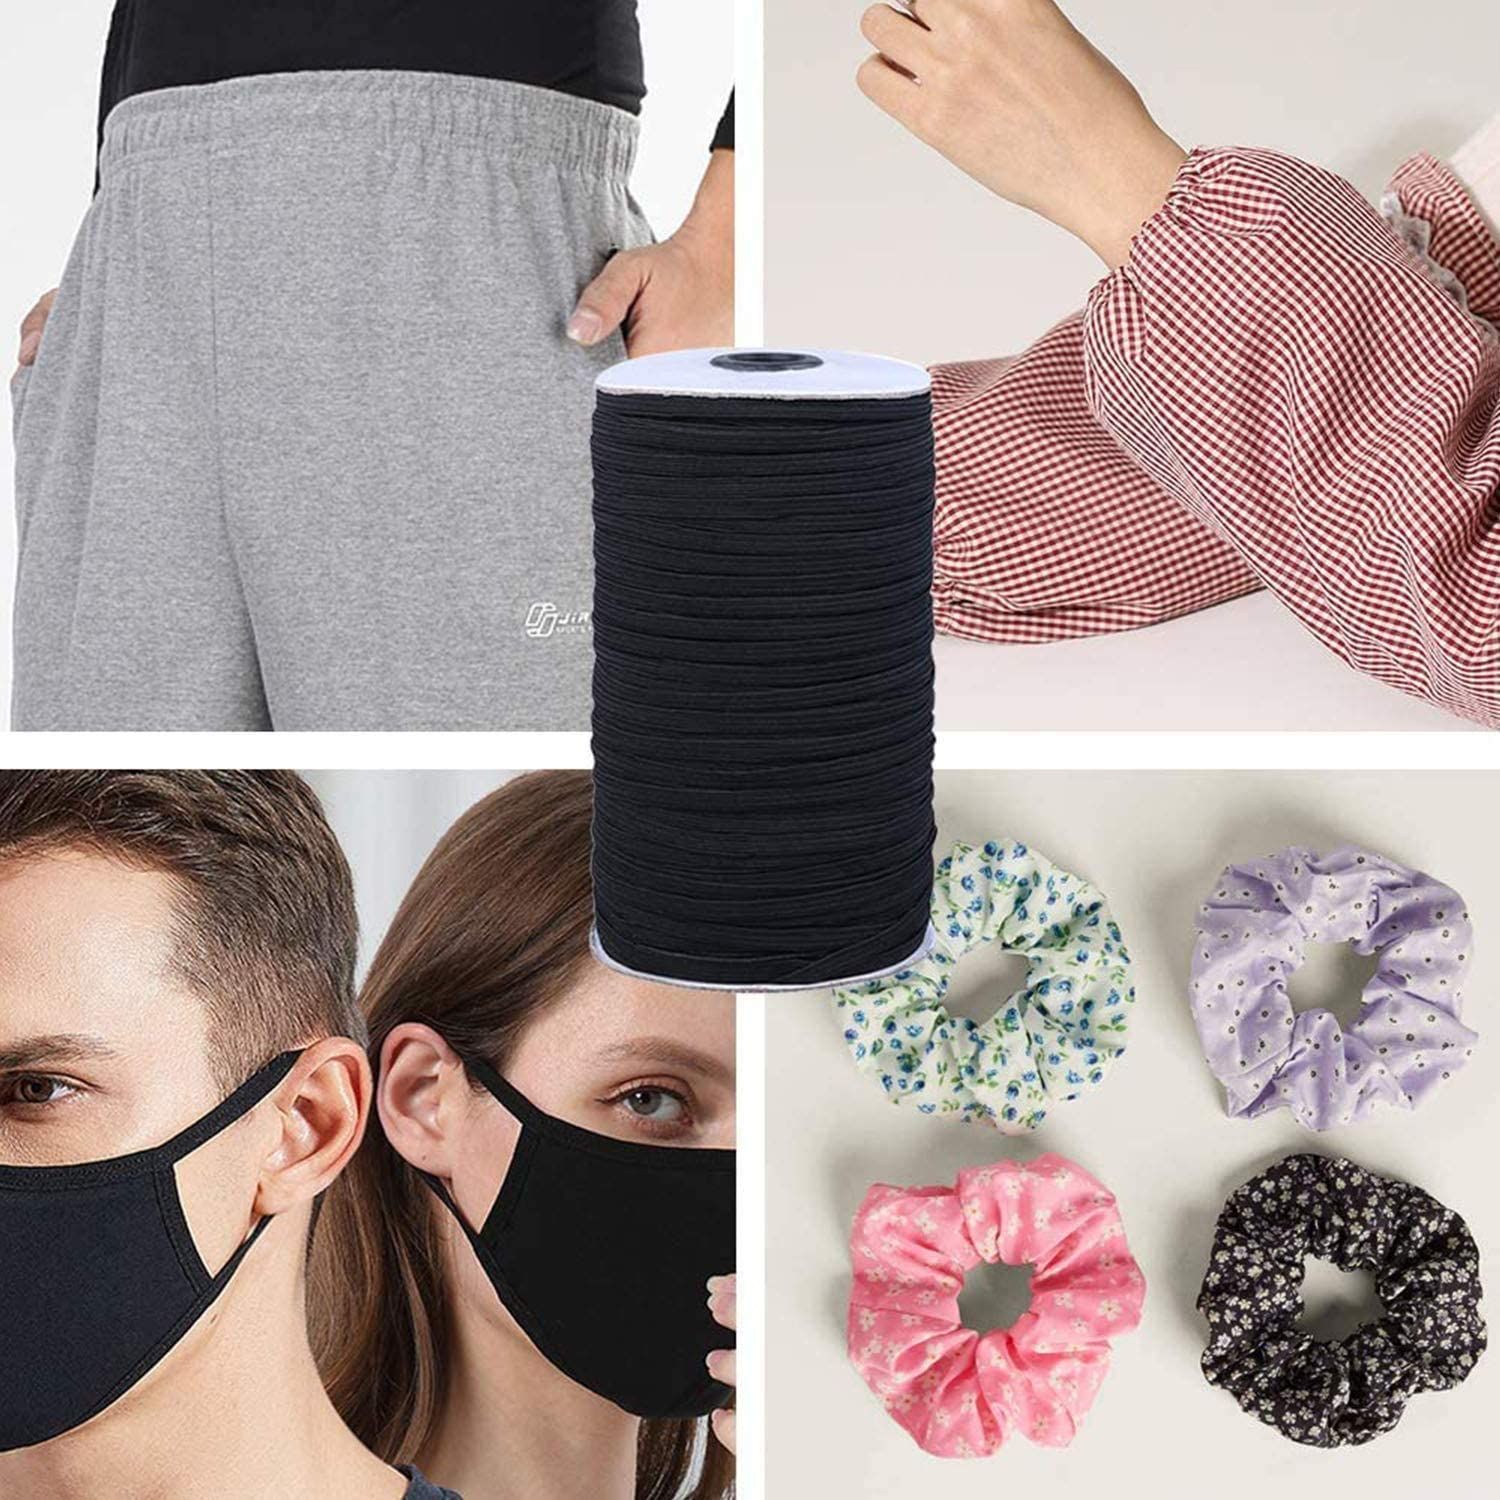 Elastic String For Face Masks 1 4 Inch Elastic For Sewing Masks Bandas  Elasticas Fitness De Resistencia Black And White244Q From Jingtou33, $9.05